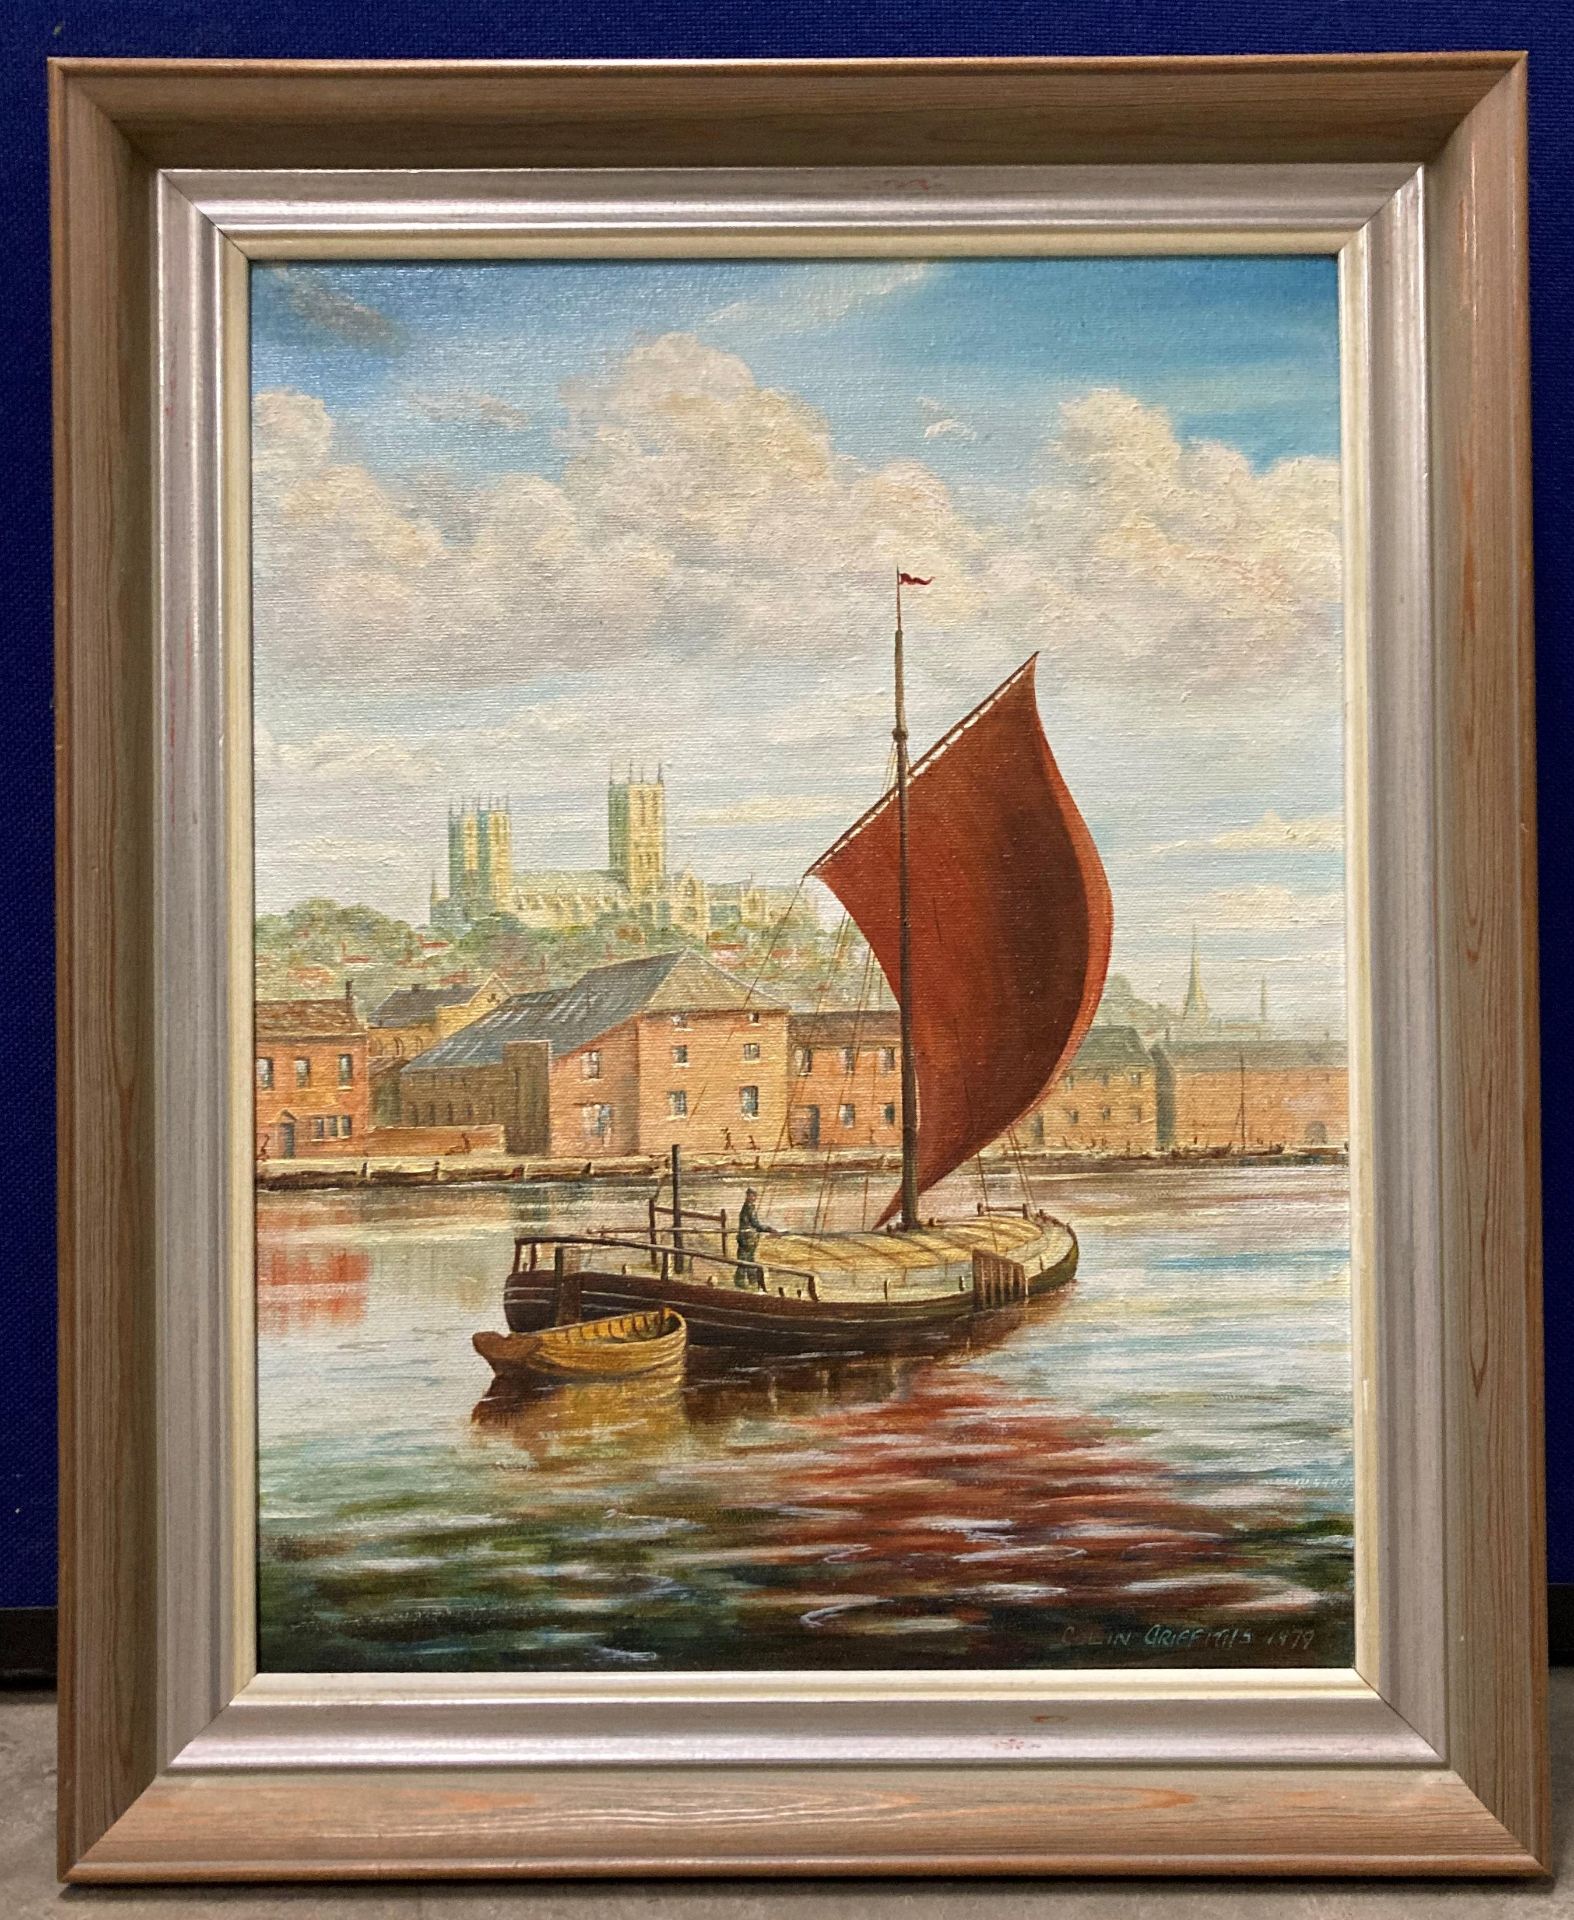 Colin Griffiths (January 1979) framed oil on canvas 'Humber keel entering Brayford Pool, Lincoln,